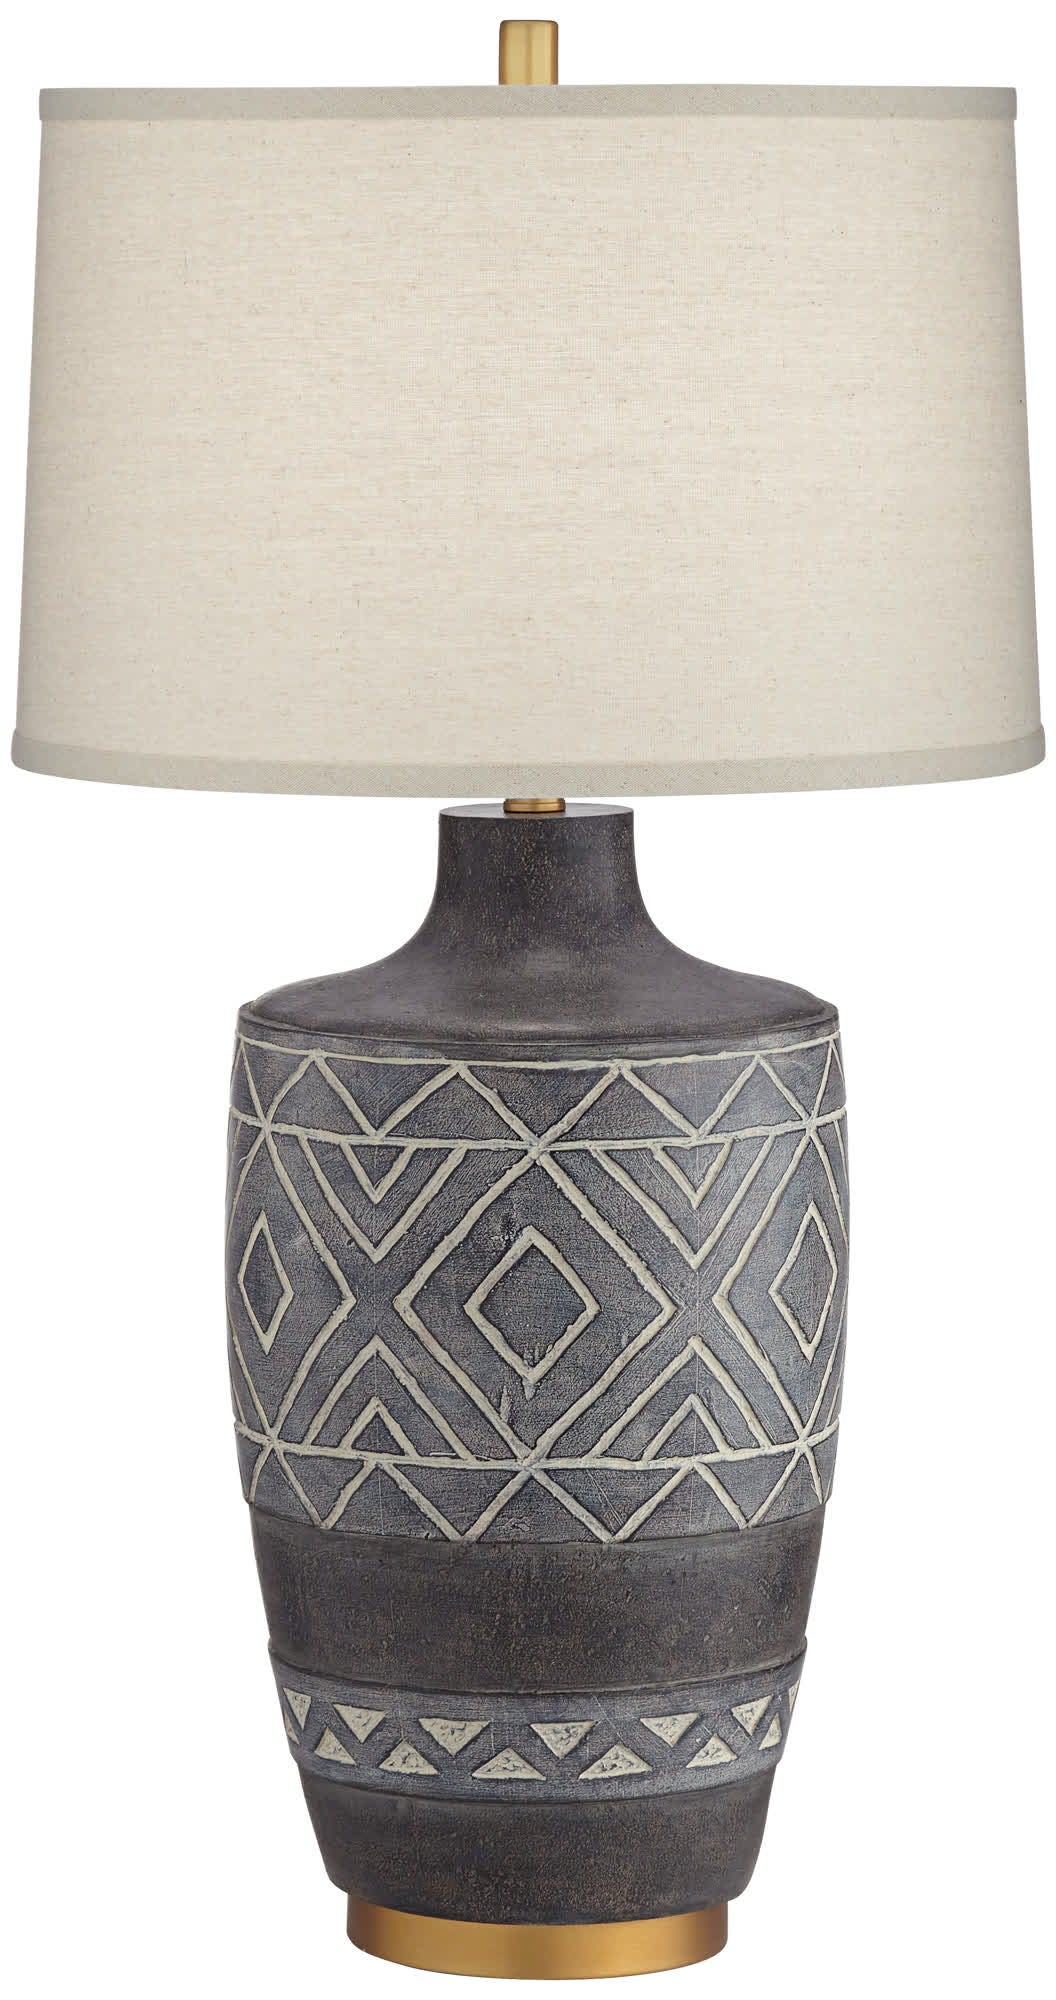 Mesa - Table Lamp - Black With Decoration